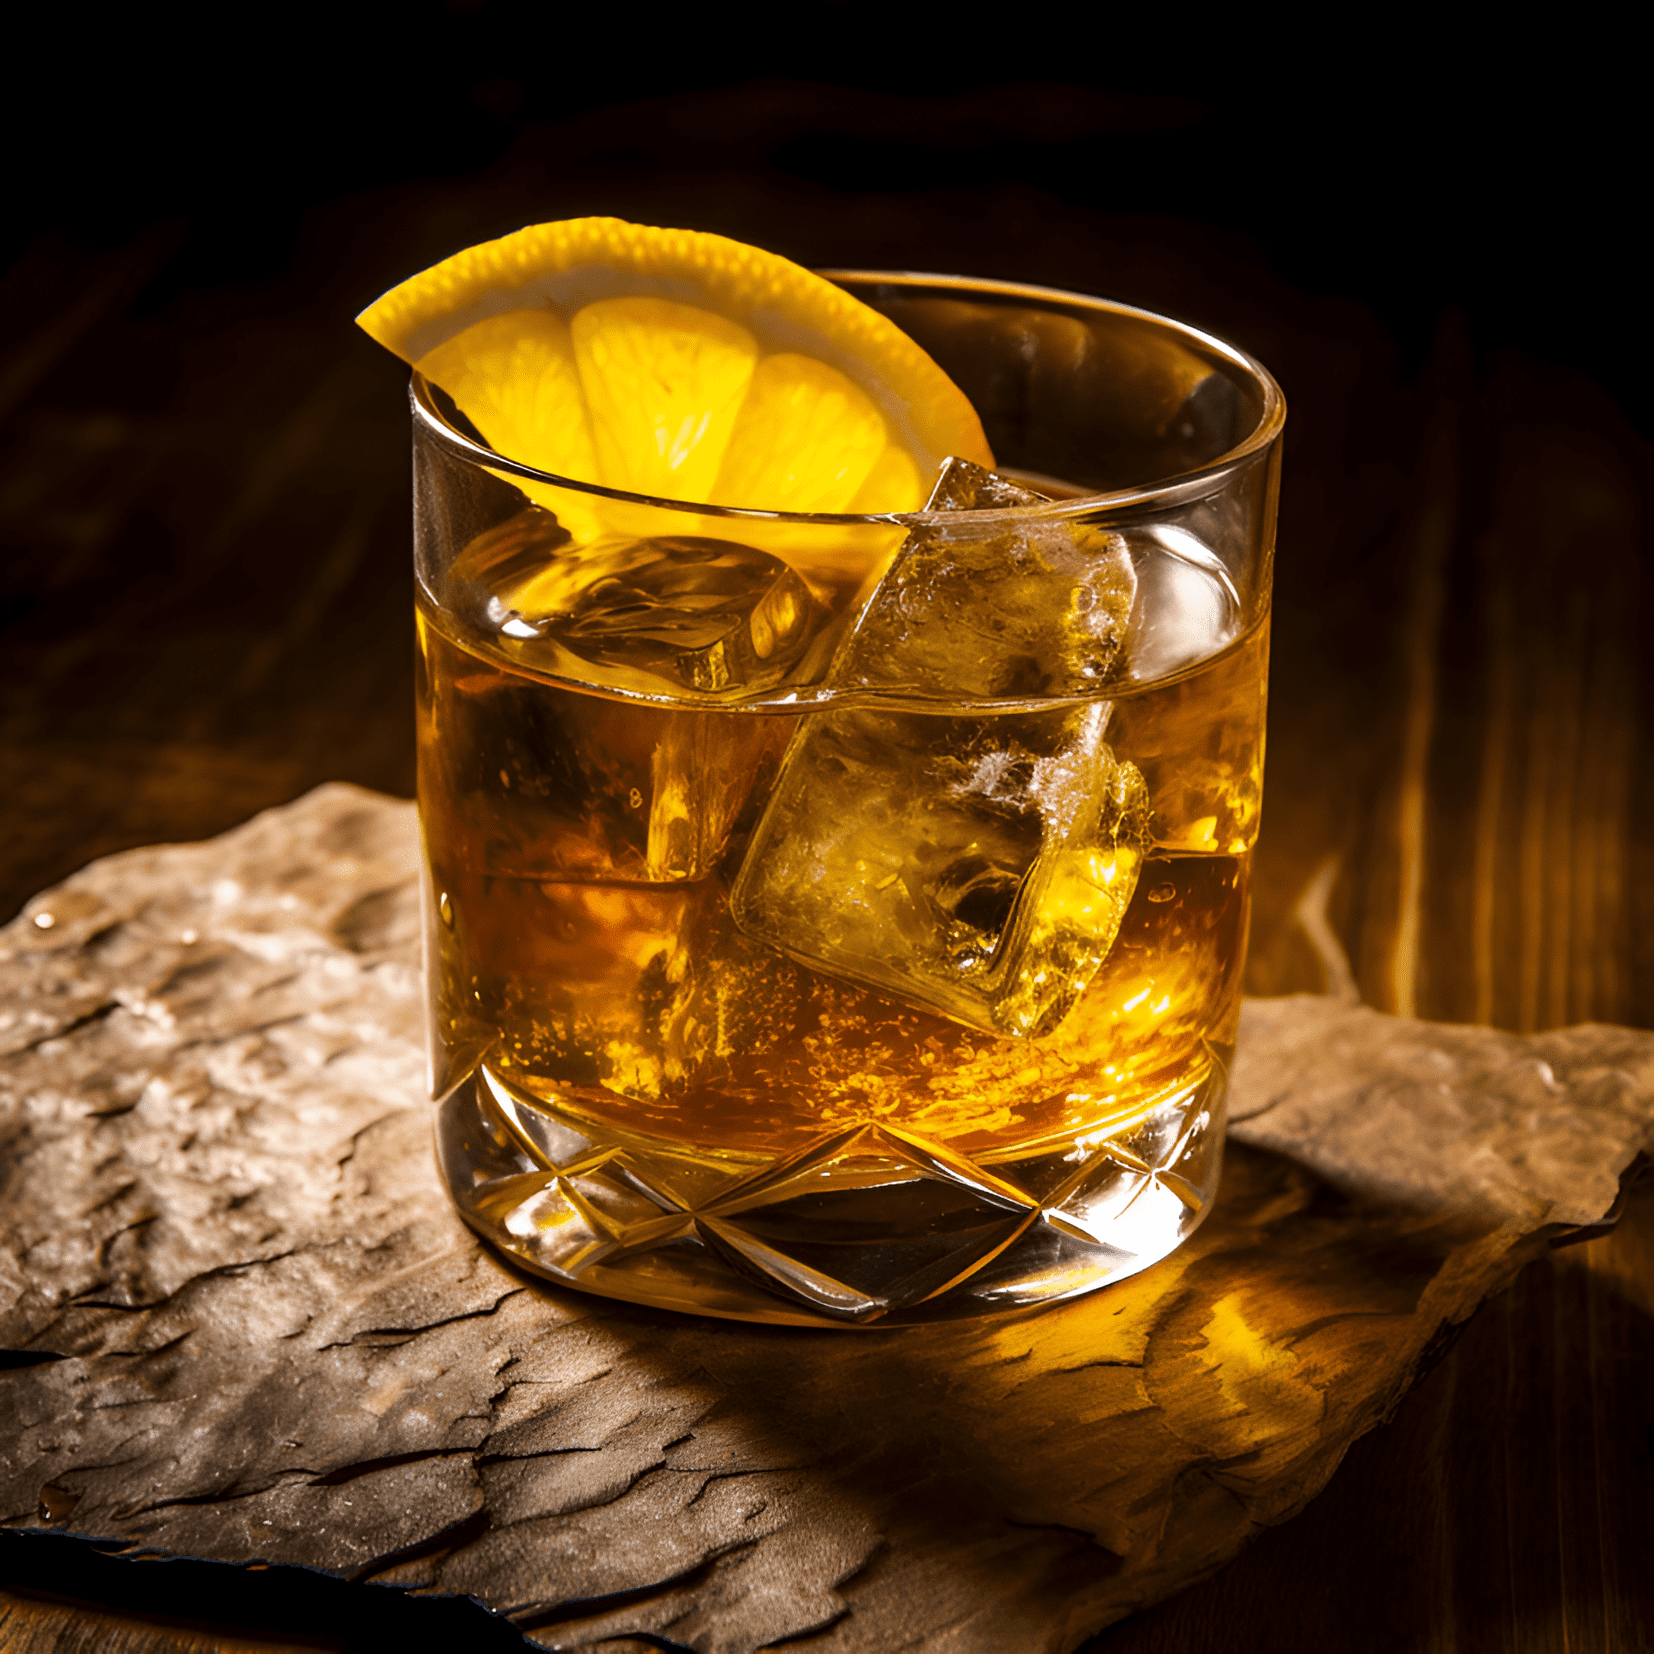 Rock and Rye Cocktail Recipe - The Rock and Rye cocktail is a harmonious blend of sweet, spicy, and citrus flavors. The rye whiskey provides a strong, robust base, while the rock candy syrup adds a touch of sweetness. The addition of lemon and orange peels brings a refreshing citrus note to the mix.